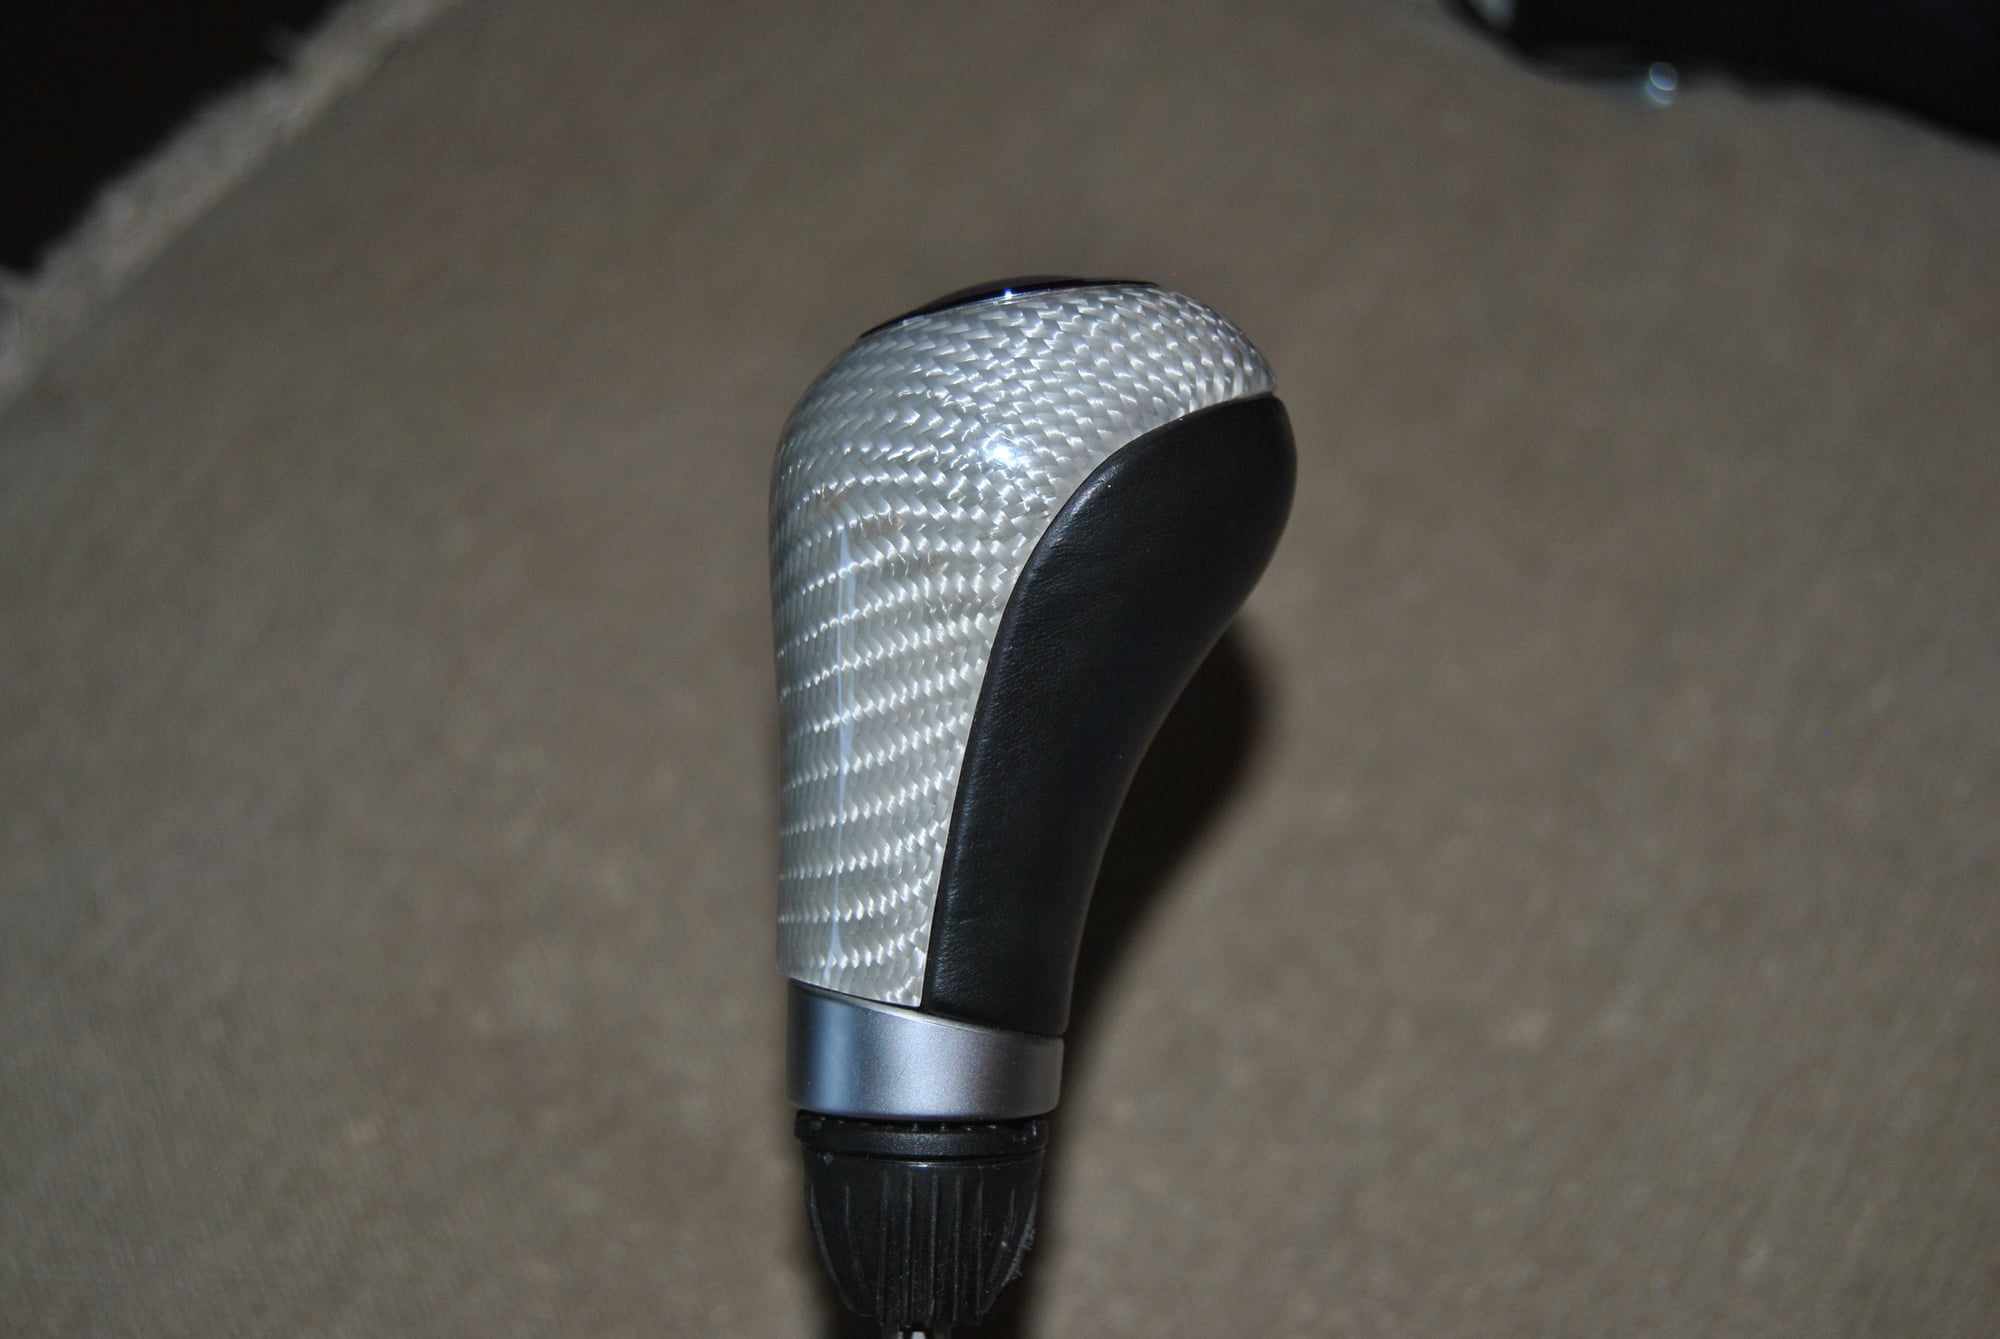 Interior/Upholstery - '01-'04 MB W203 Flat Bottom Carbon Fiber & Leather Steering Wheel/Gearshift Knob - Used - 2001 to 2004 Mercedes-Benz C240 - Upland, CA 91784, United States